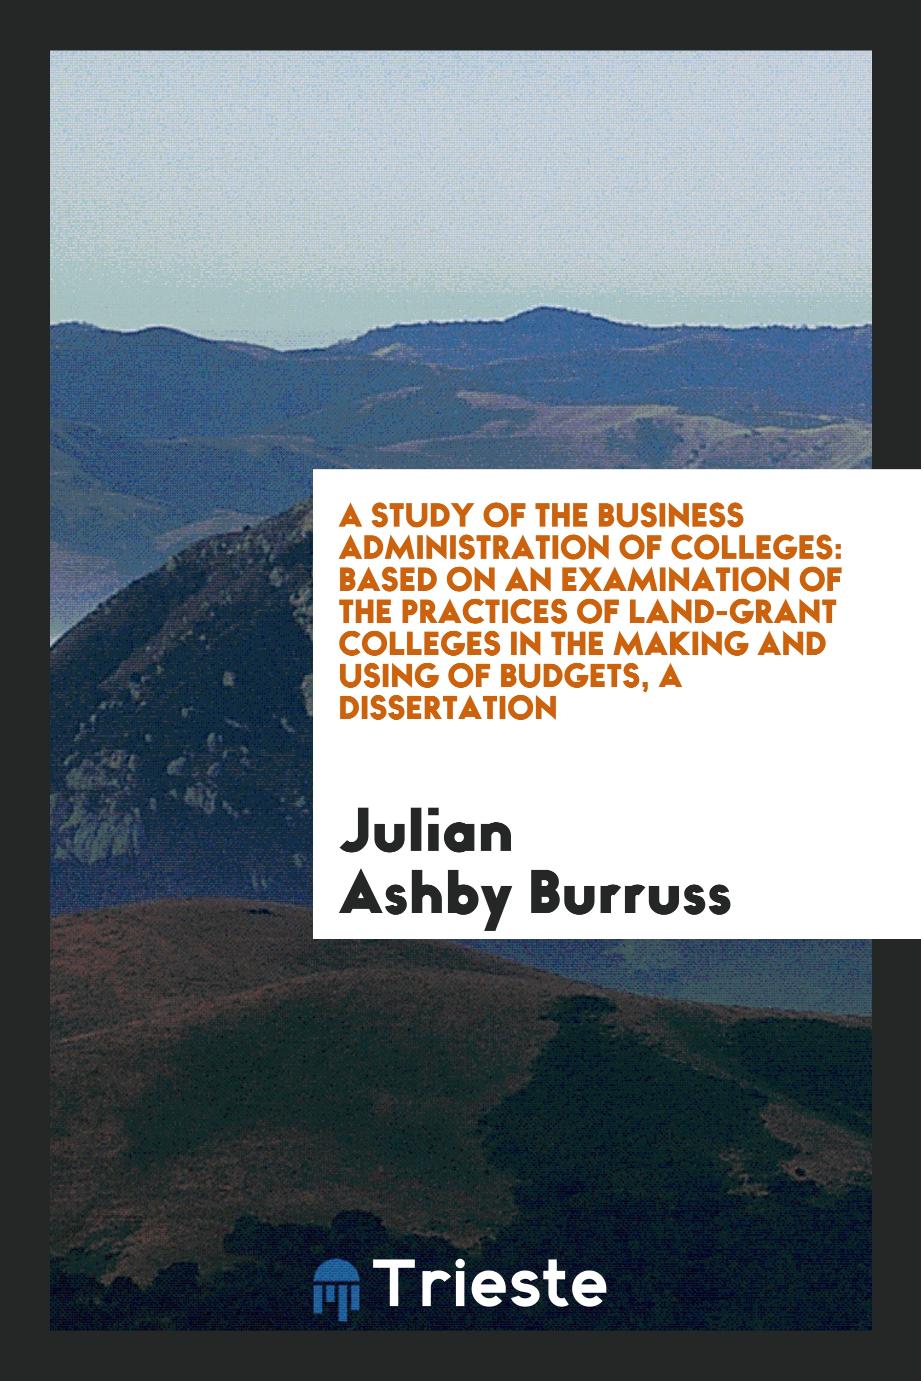 A Study of the Business Administration of Colleges: Based on an Examination of the practices of land-grant colleges in the making and using of budgets, A Dissertation